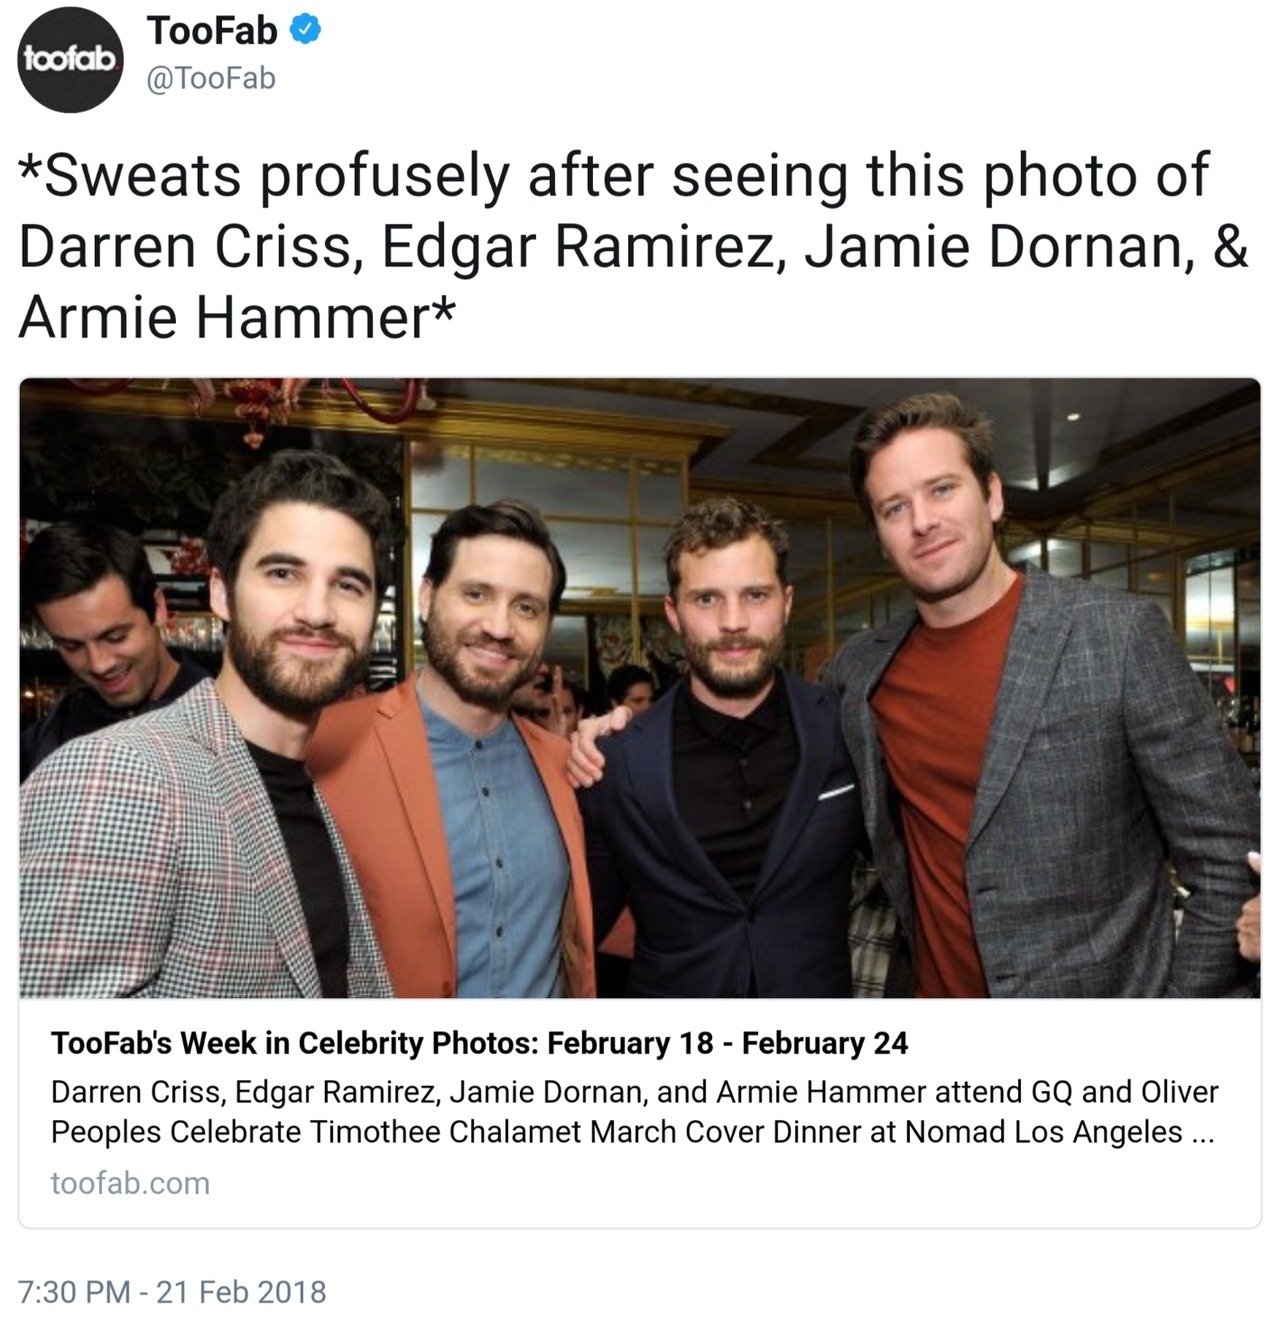 hashtag - Darren's Miscellaneous Projects and Events for 2018 - Page 2 Tumblr_p4j9dkc5sc1wpi2k2o1_1280